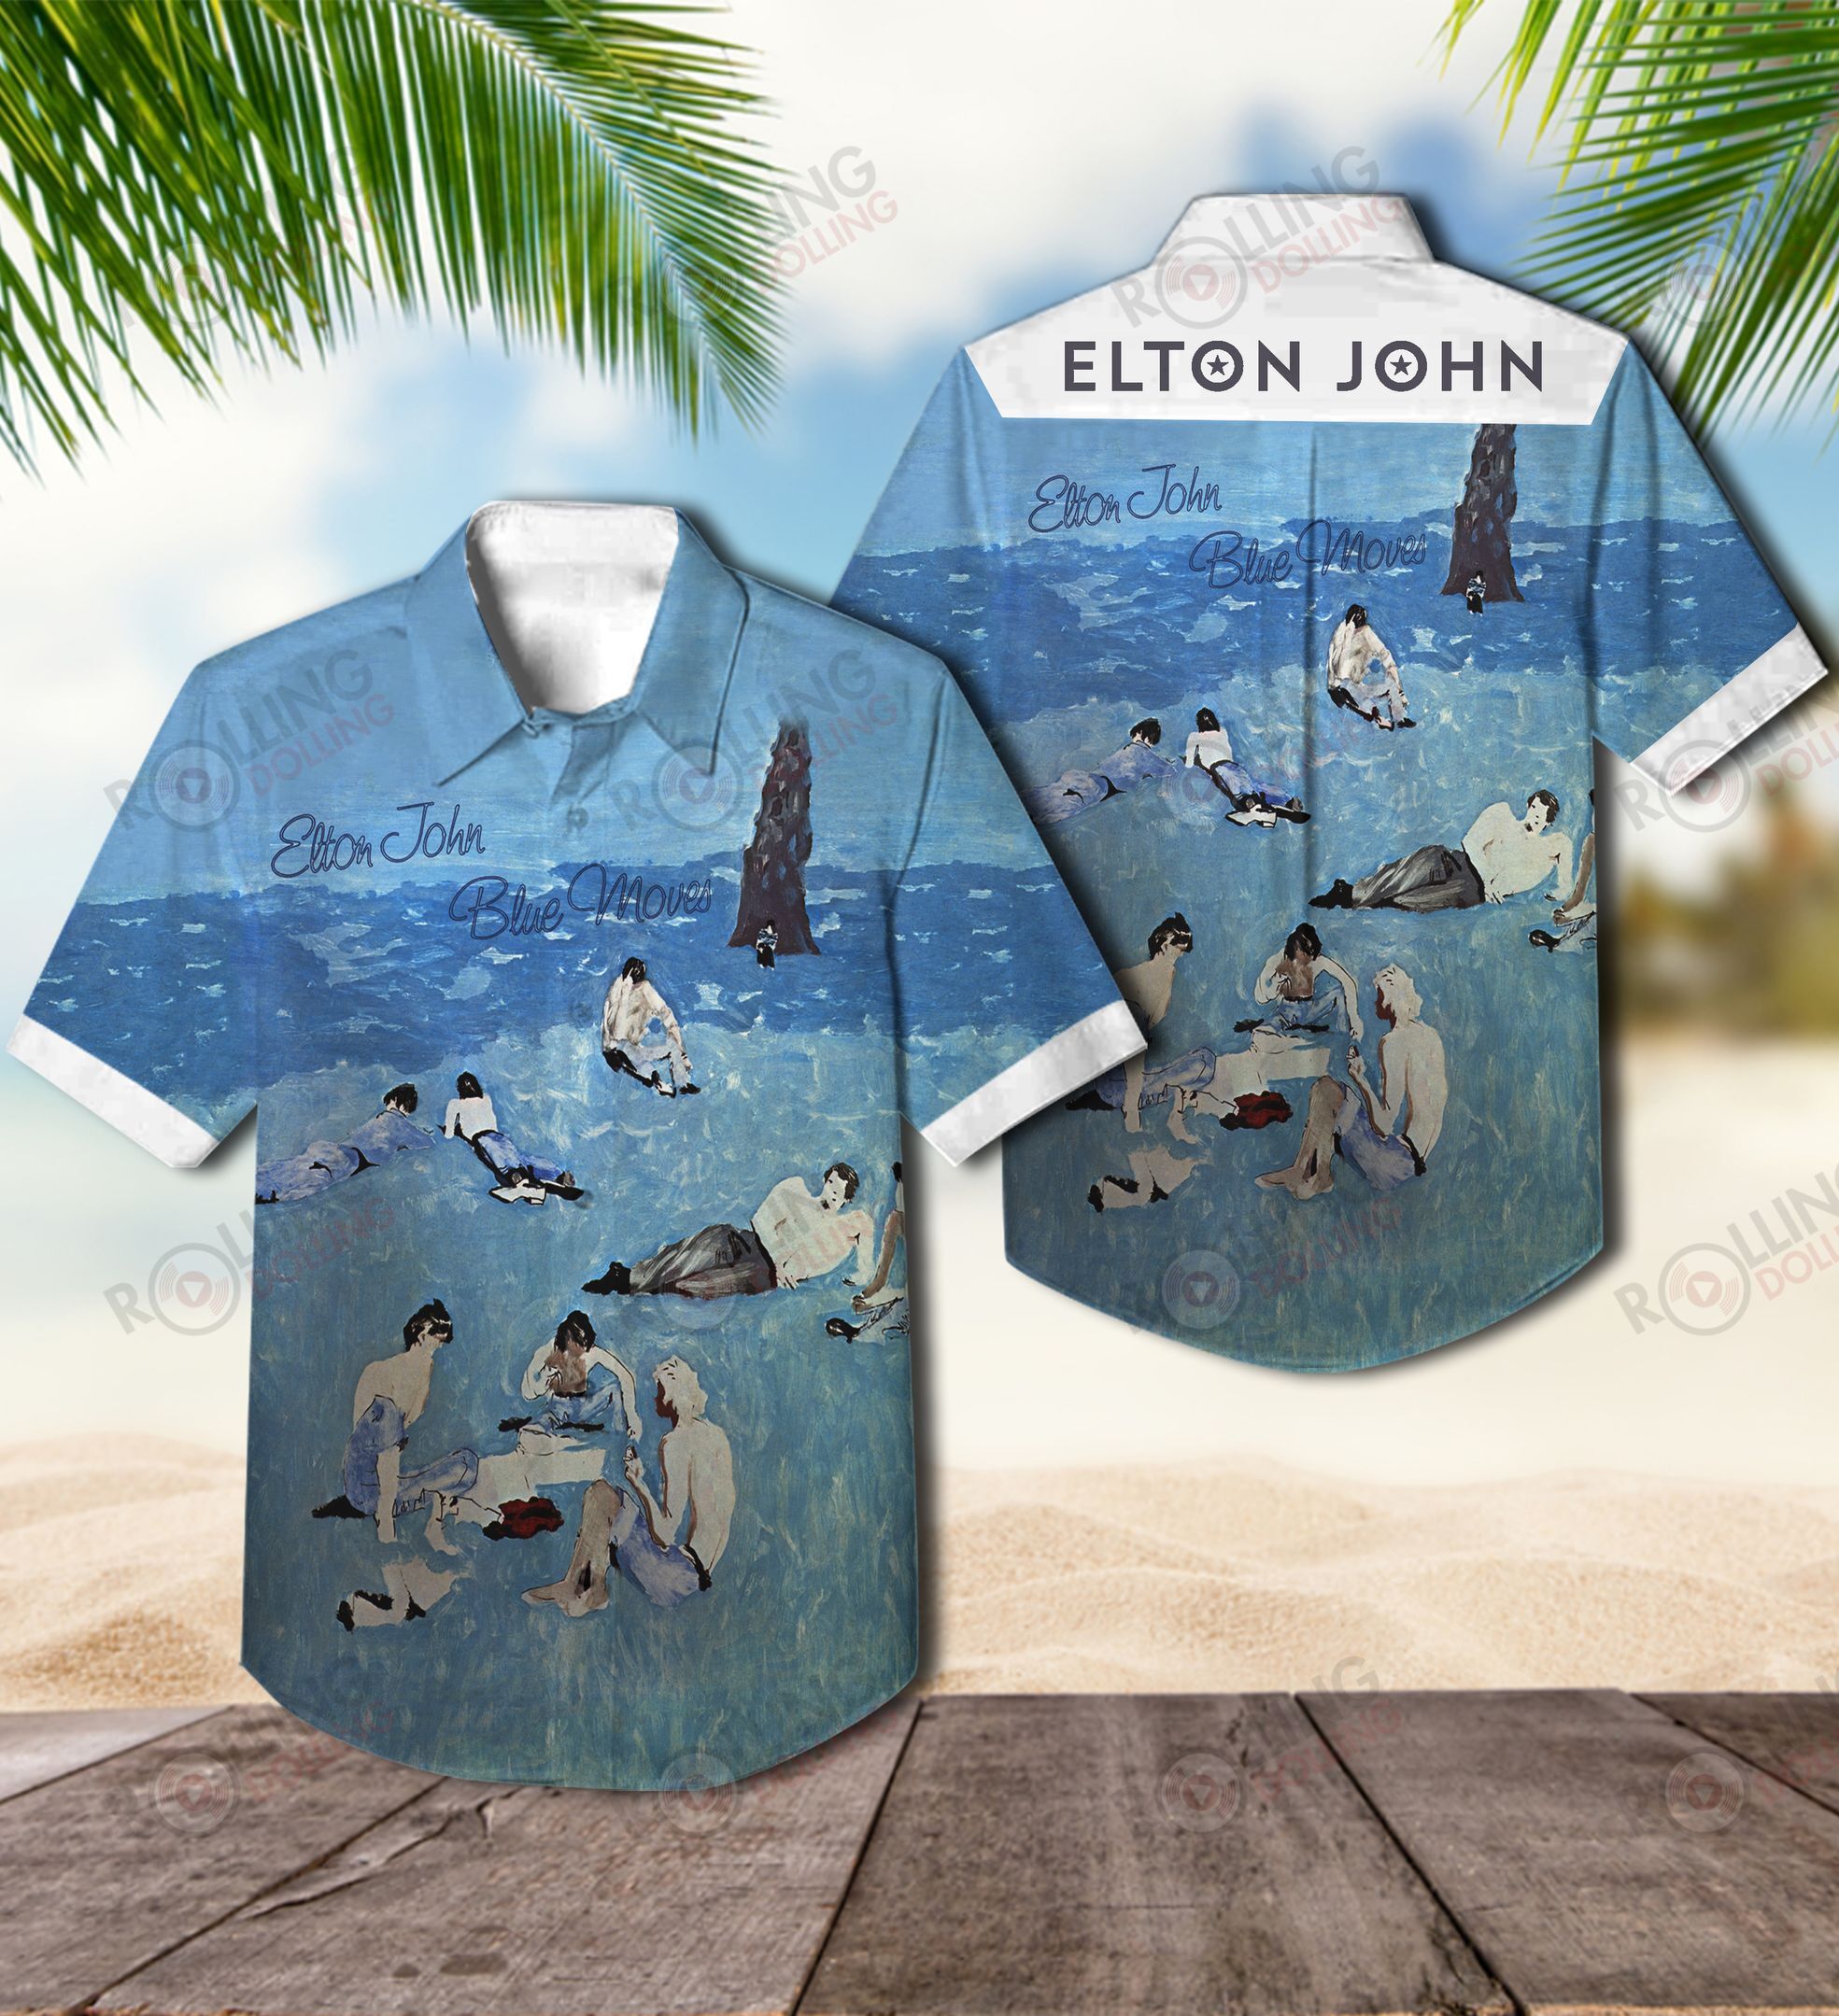 We have compiled a list of some of the best Hawaiian shirt that are available 151